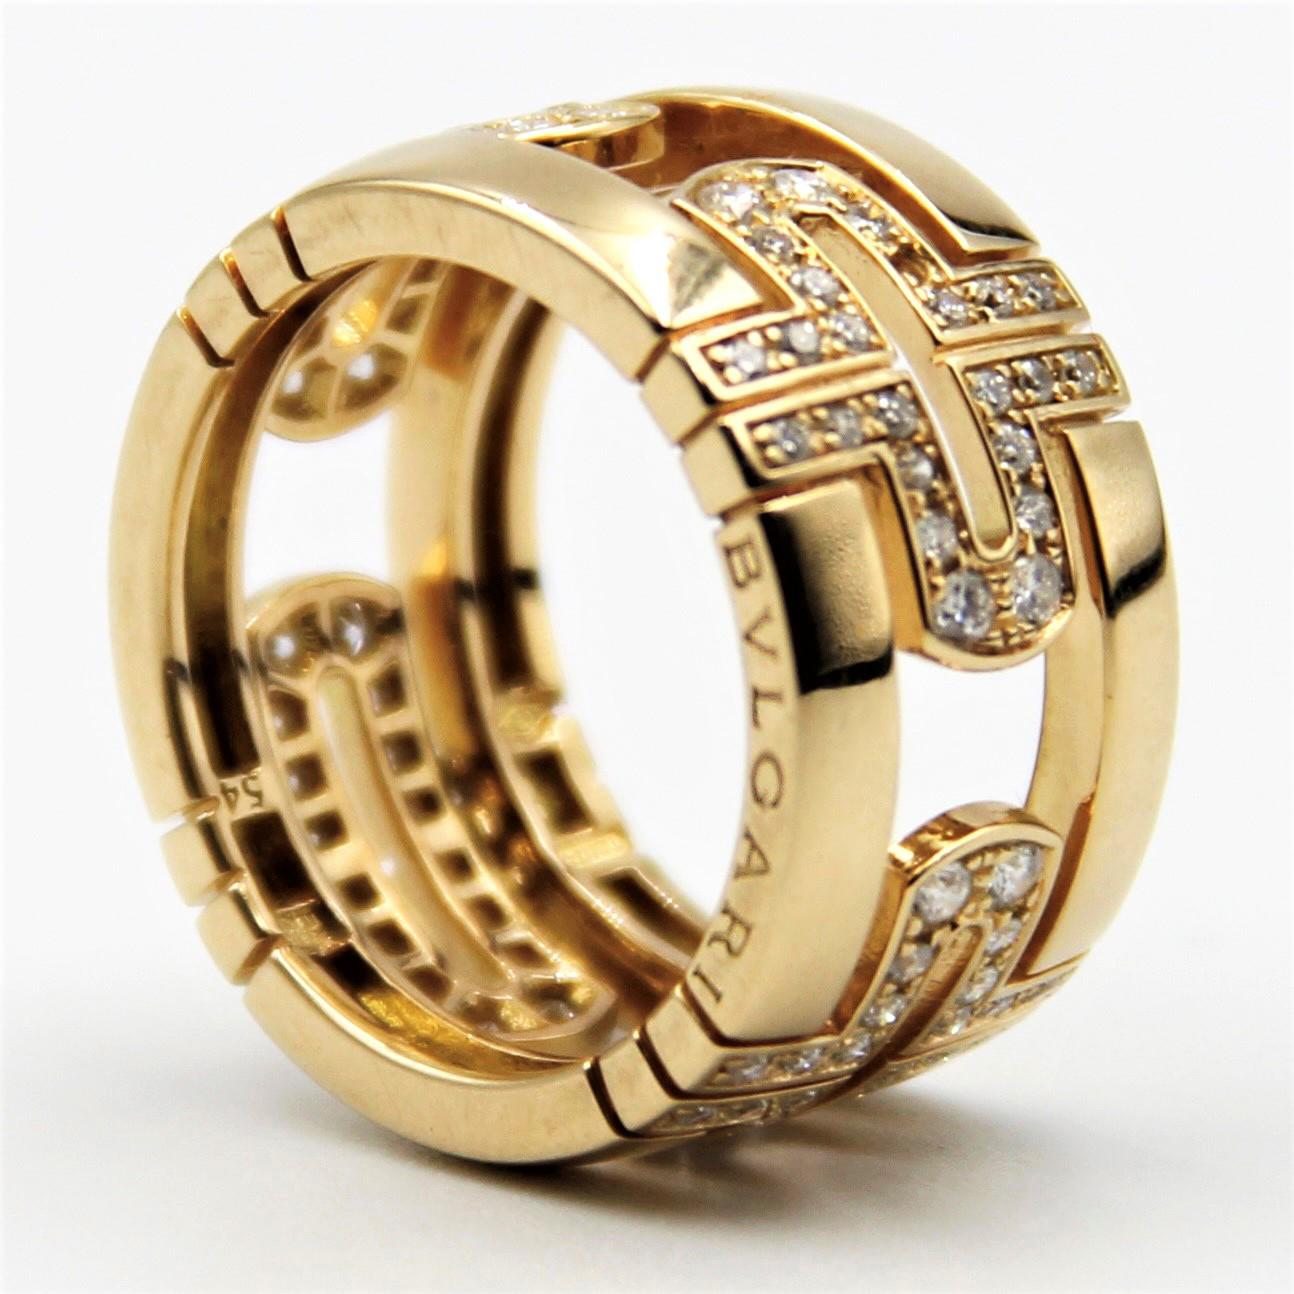 This Bvlgari Parentesi 18k yellow gold 0.70 ct. Diamond Ring with strong geometry  . The ring is made of 18-karat yellow gold, and despite its smooth curves and edges, it is impossible not to draw attention anywhere on the show. The band measures 11